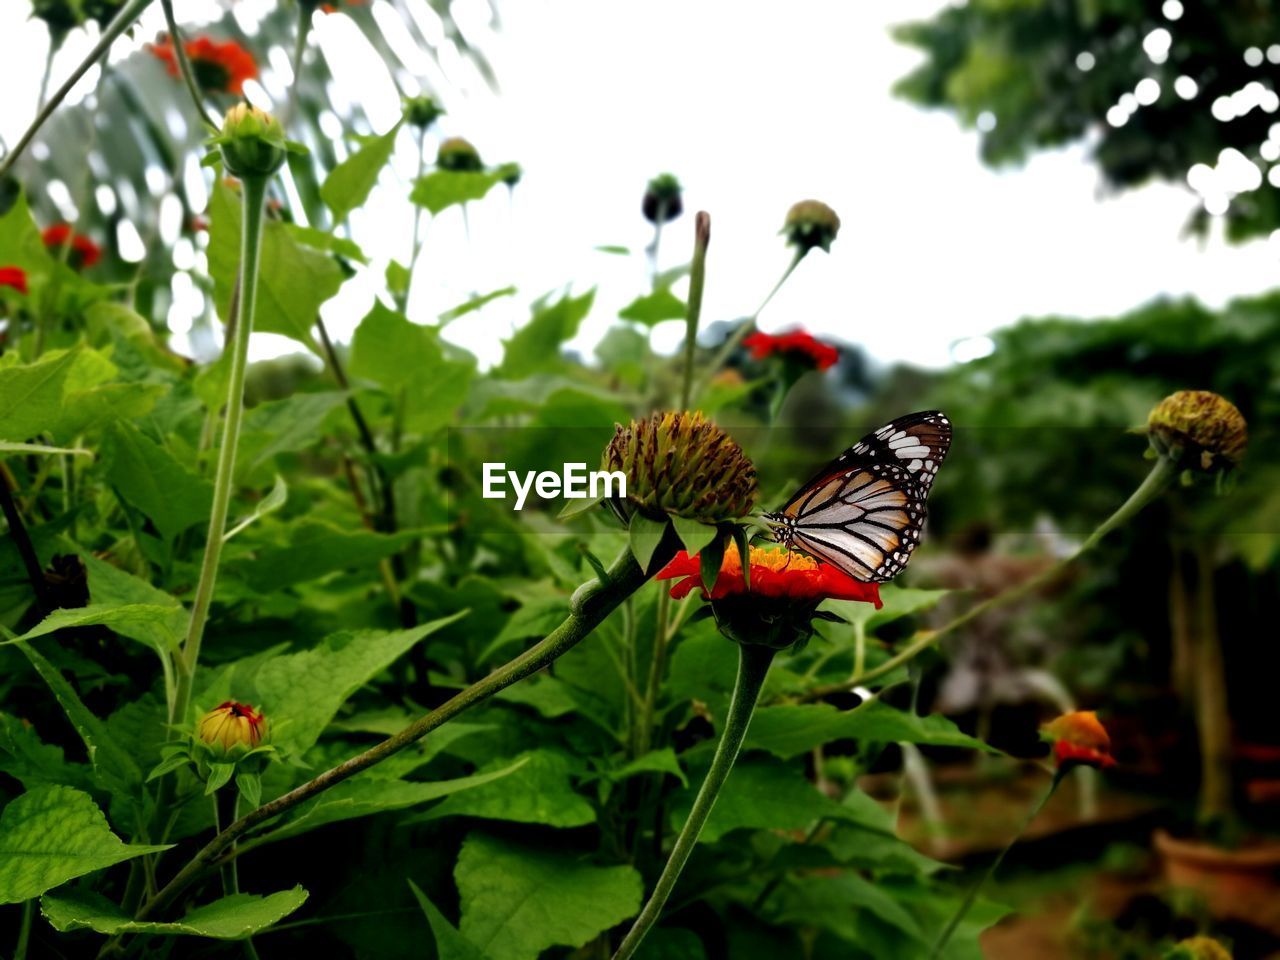 Butterfly feasting on a flower at choa chu kang park